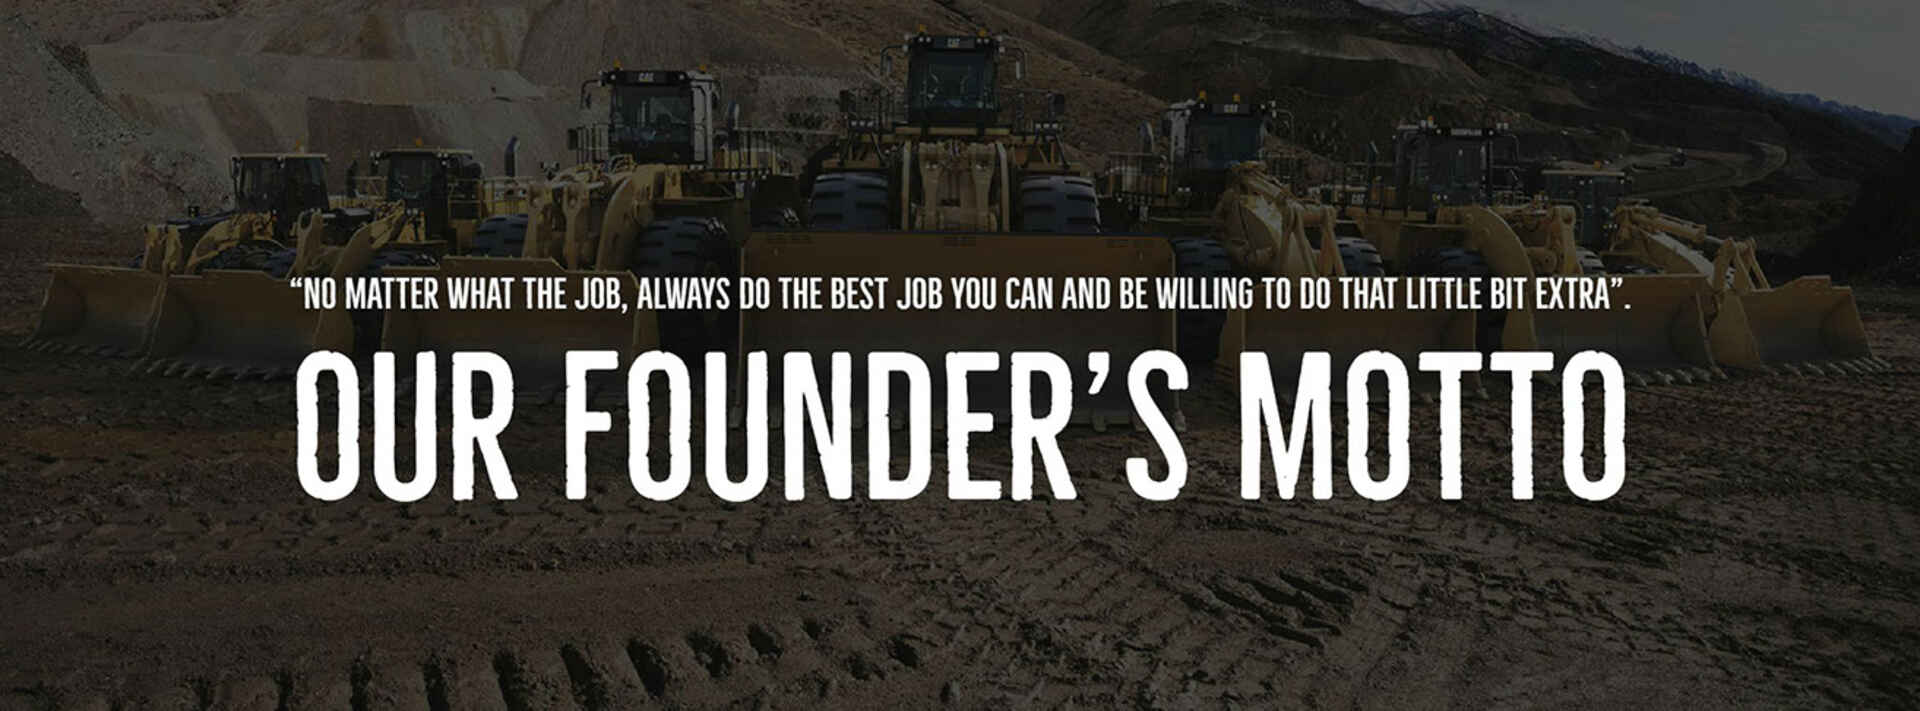 full-width image with the JG Stewart Construction founder's motto.